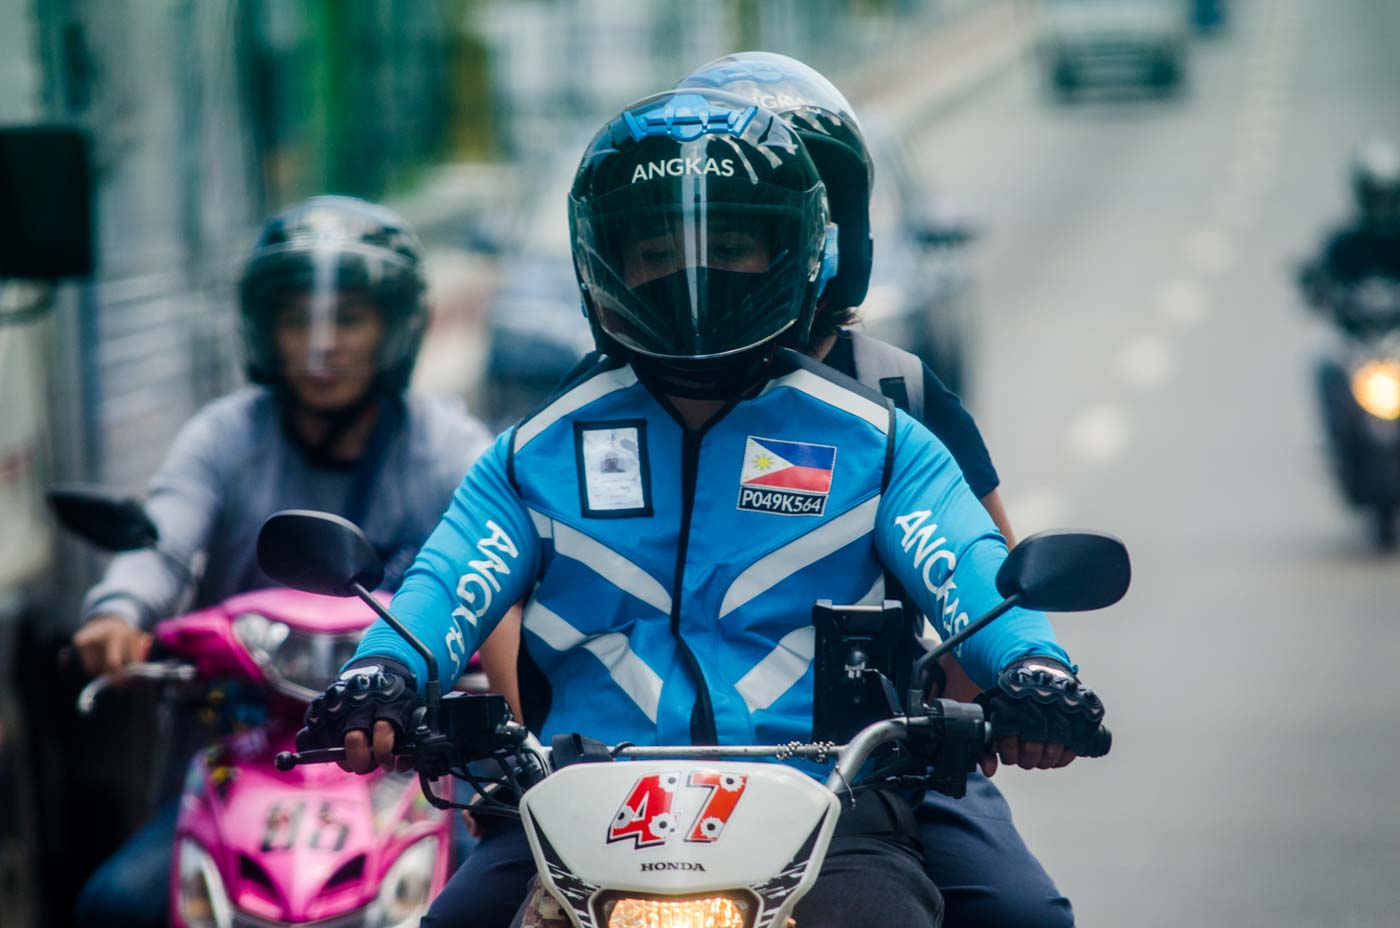 3 YEARS ON. While providing a free training program, Angkas fails 70% of rider applicants to maintain safety standards. File photo by Rob Reyes/Rappler 